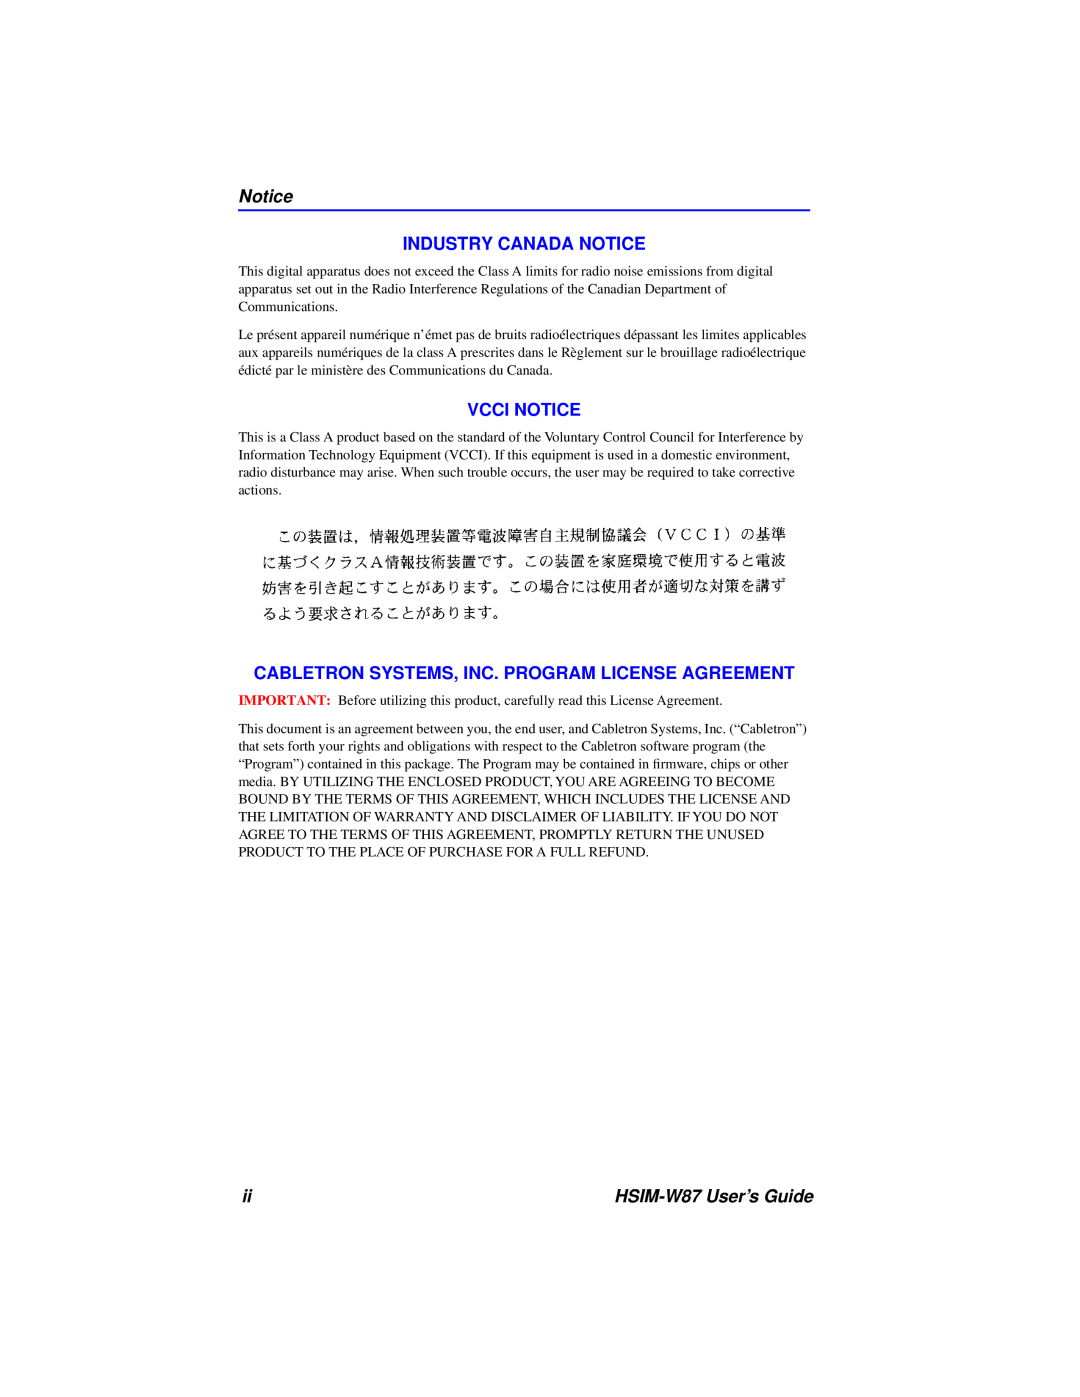 Cabletron Systems HSIM-W87 manual Industry Canada Notice, Vcci Notice, Cabletron Systems, Inc. Program License Agreement 